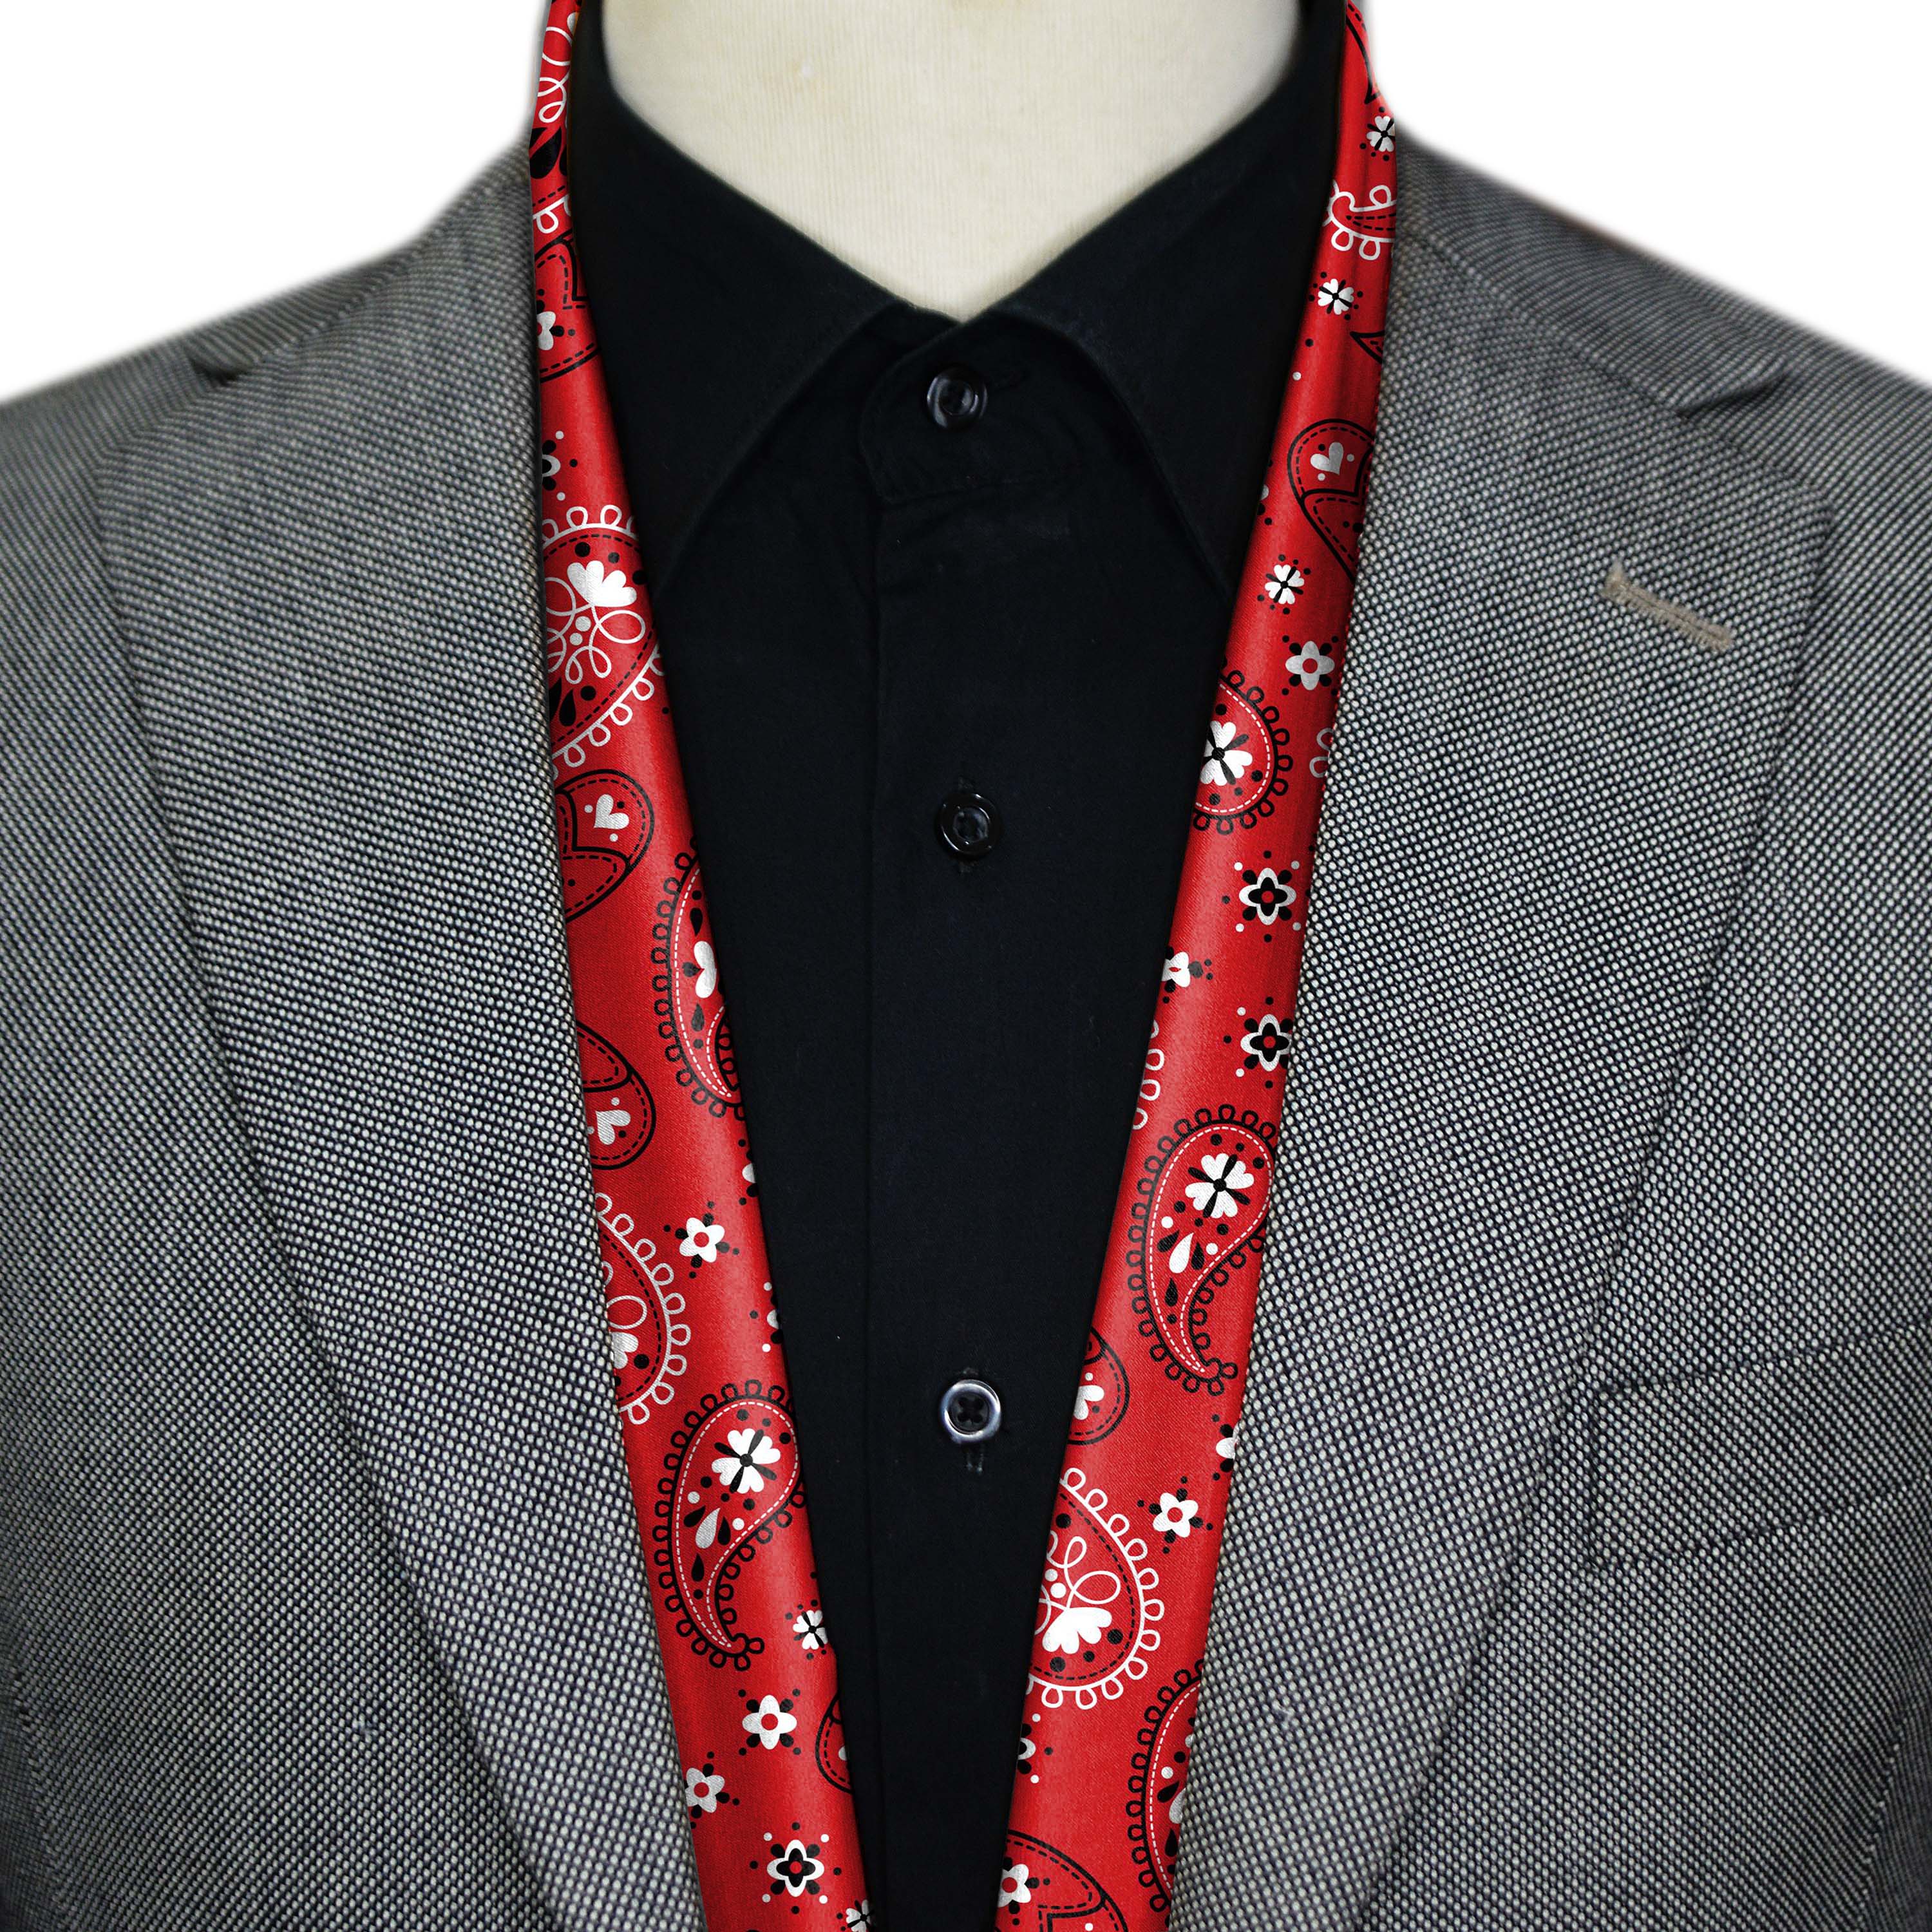 RED PAISLEY MEN SCARF - PREMIUM COLLECTION